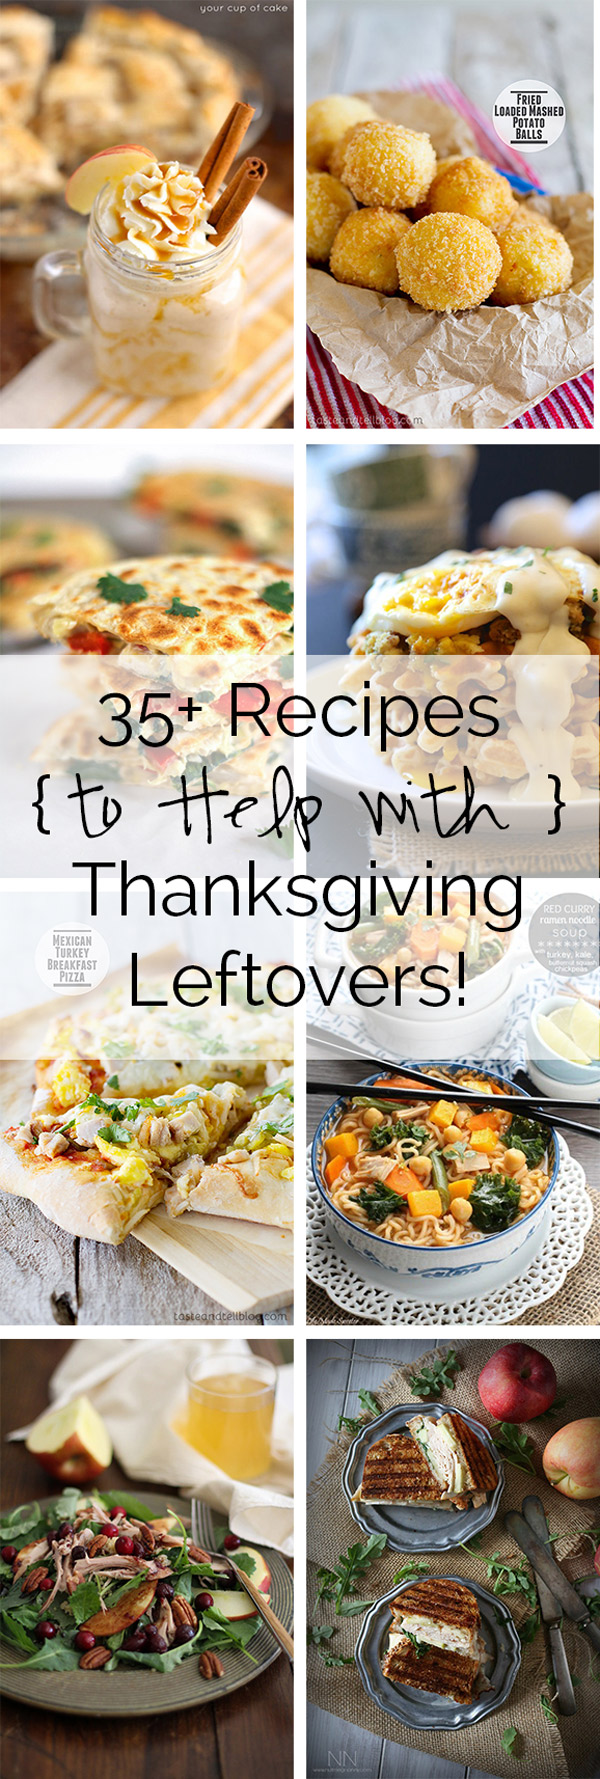 35+ Recipes to Help with Thanksgiving Leftovers!